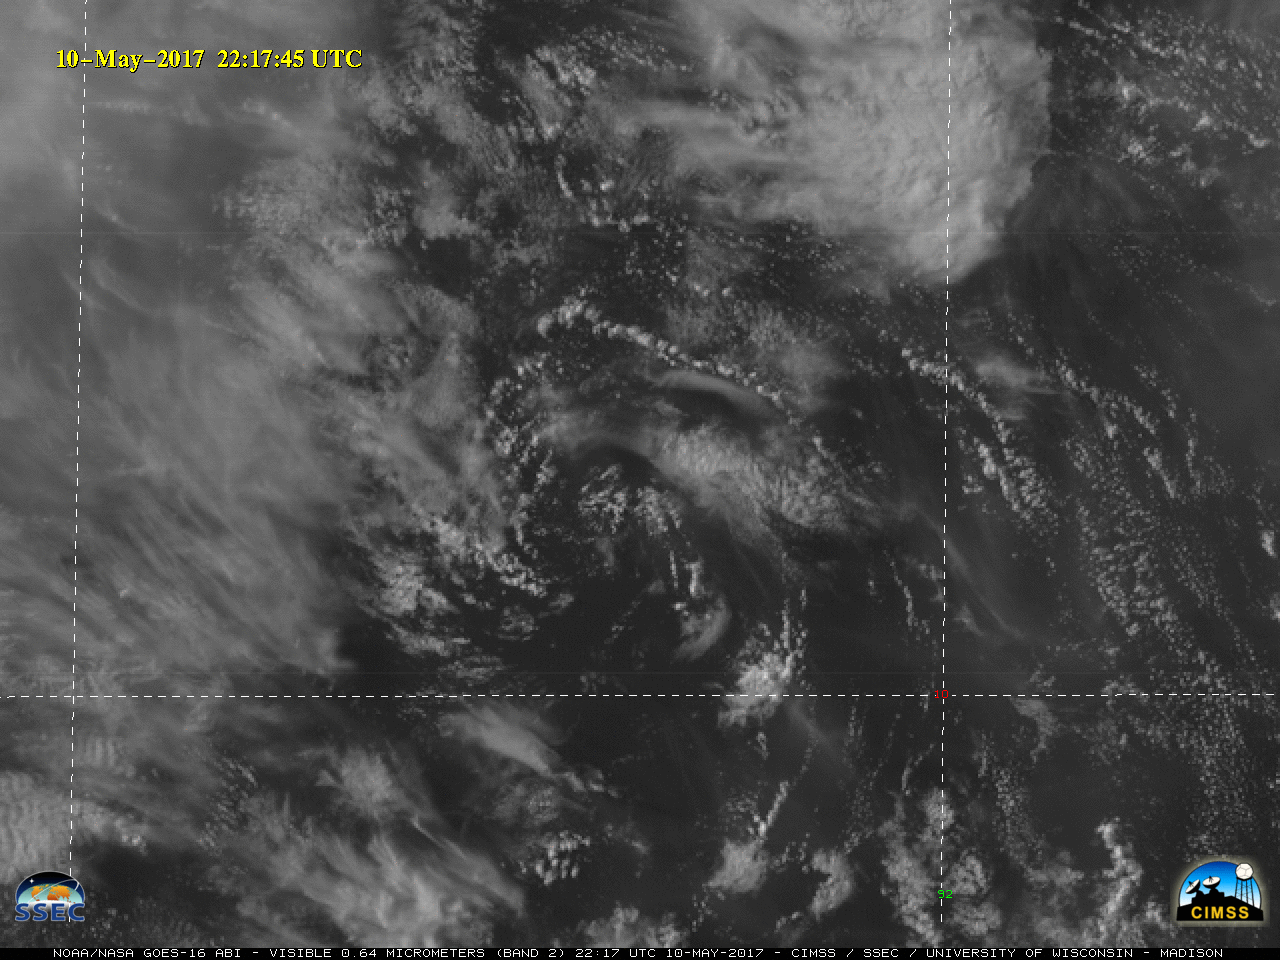 GOES-16 Visible (0.64 µm) images [click to play animation]